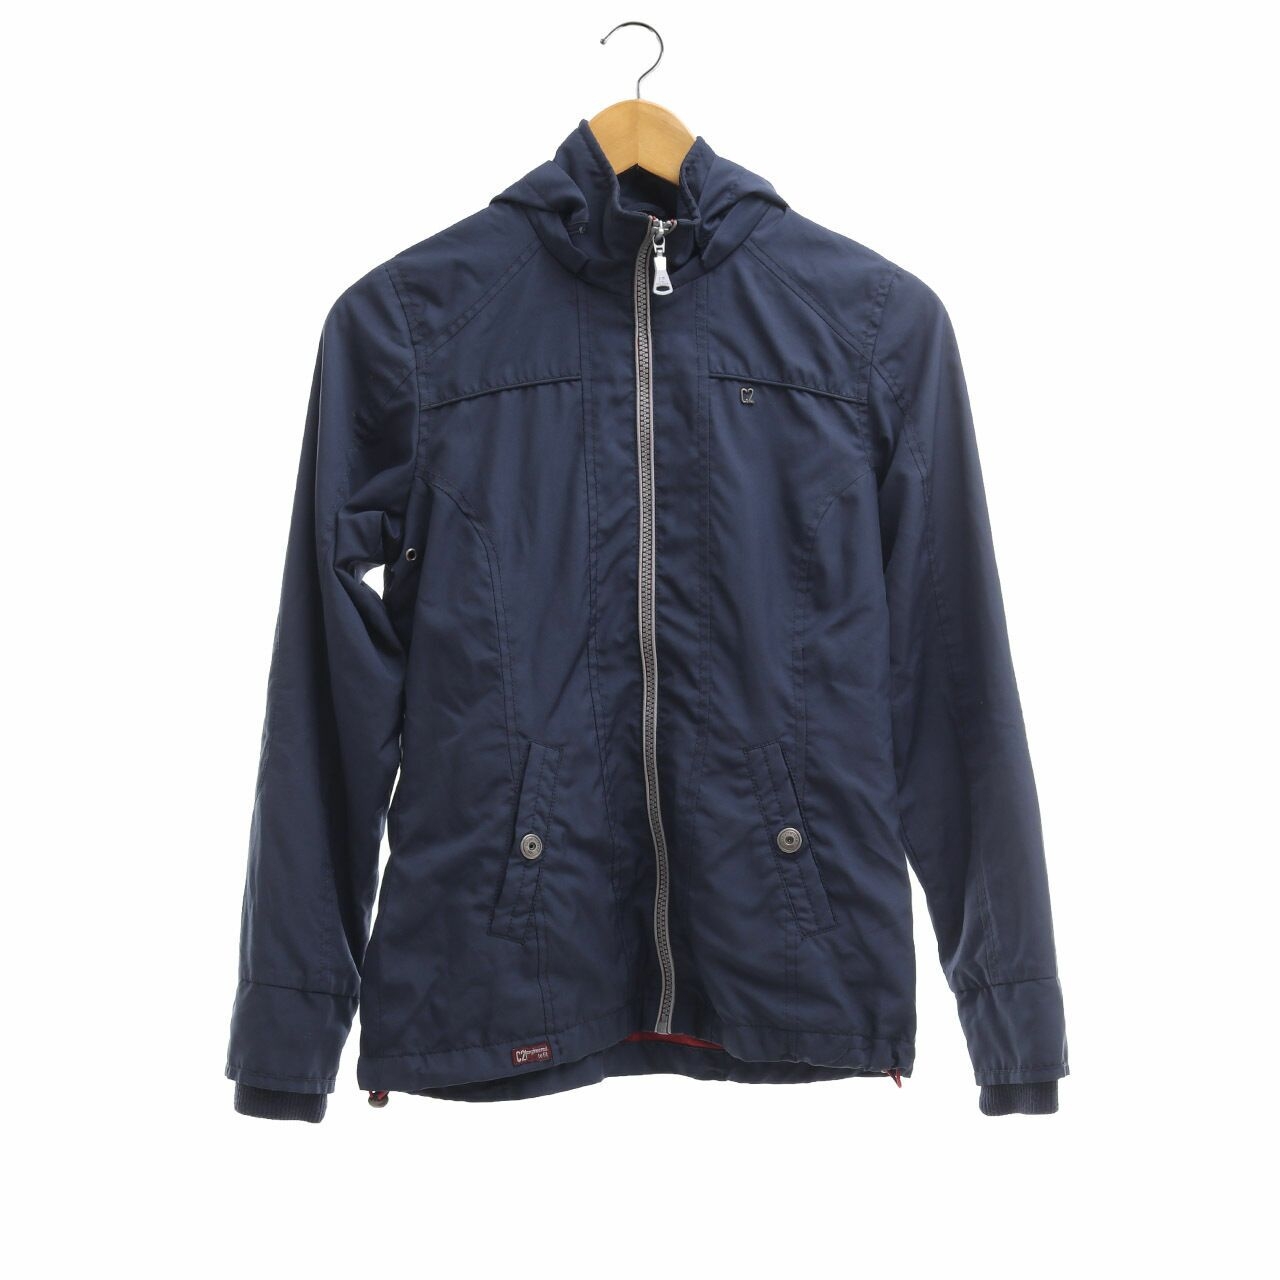 C2 outfitters Navy Jacket